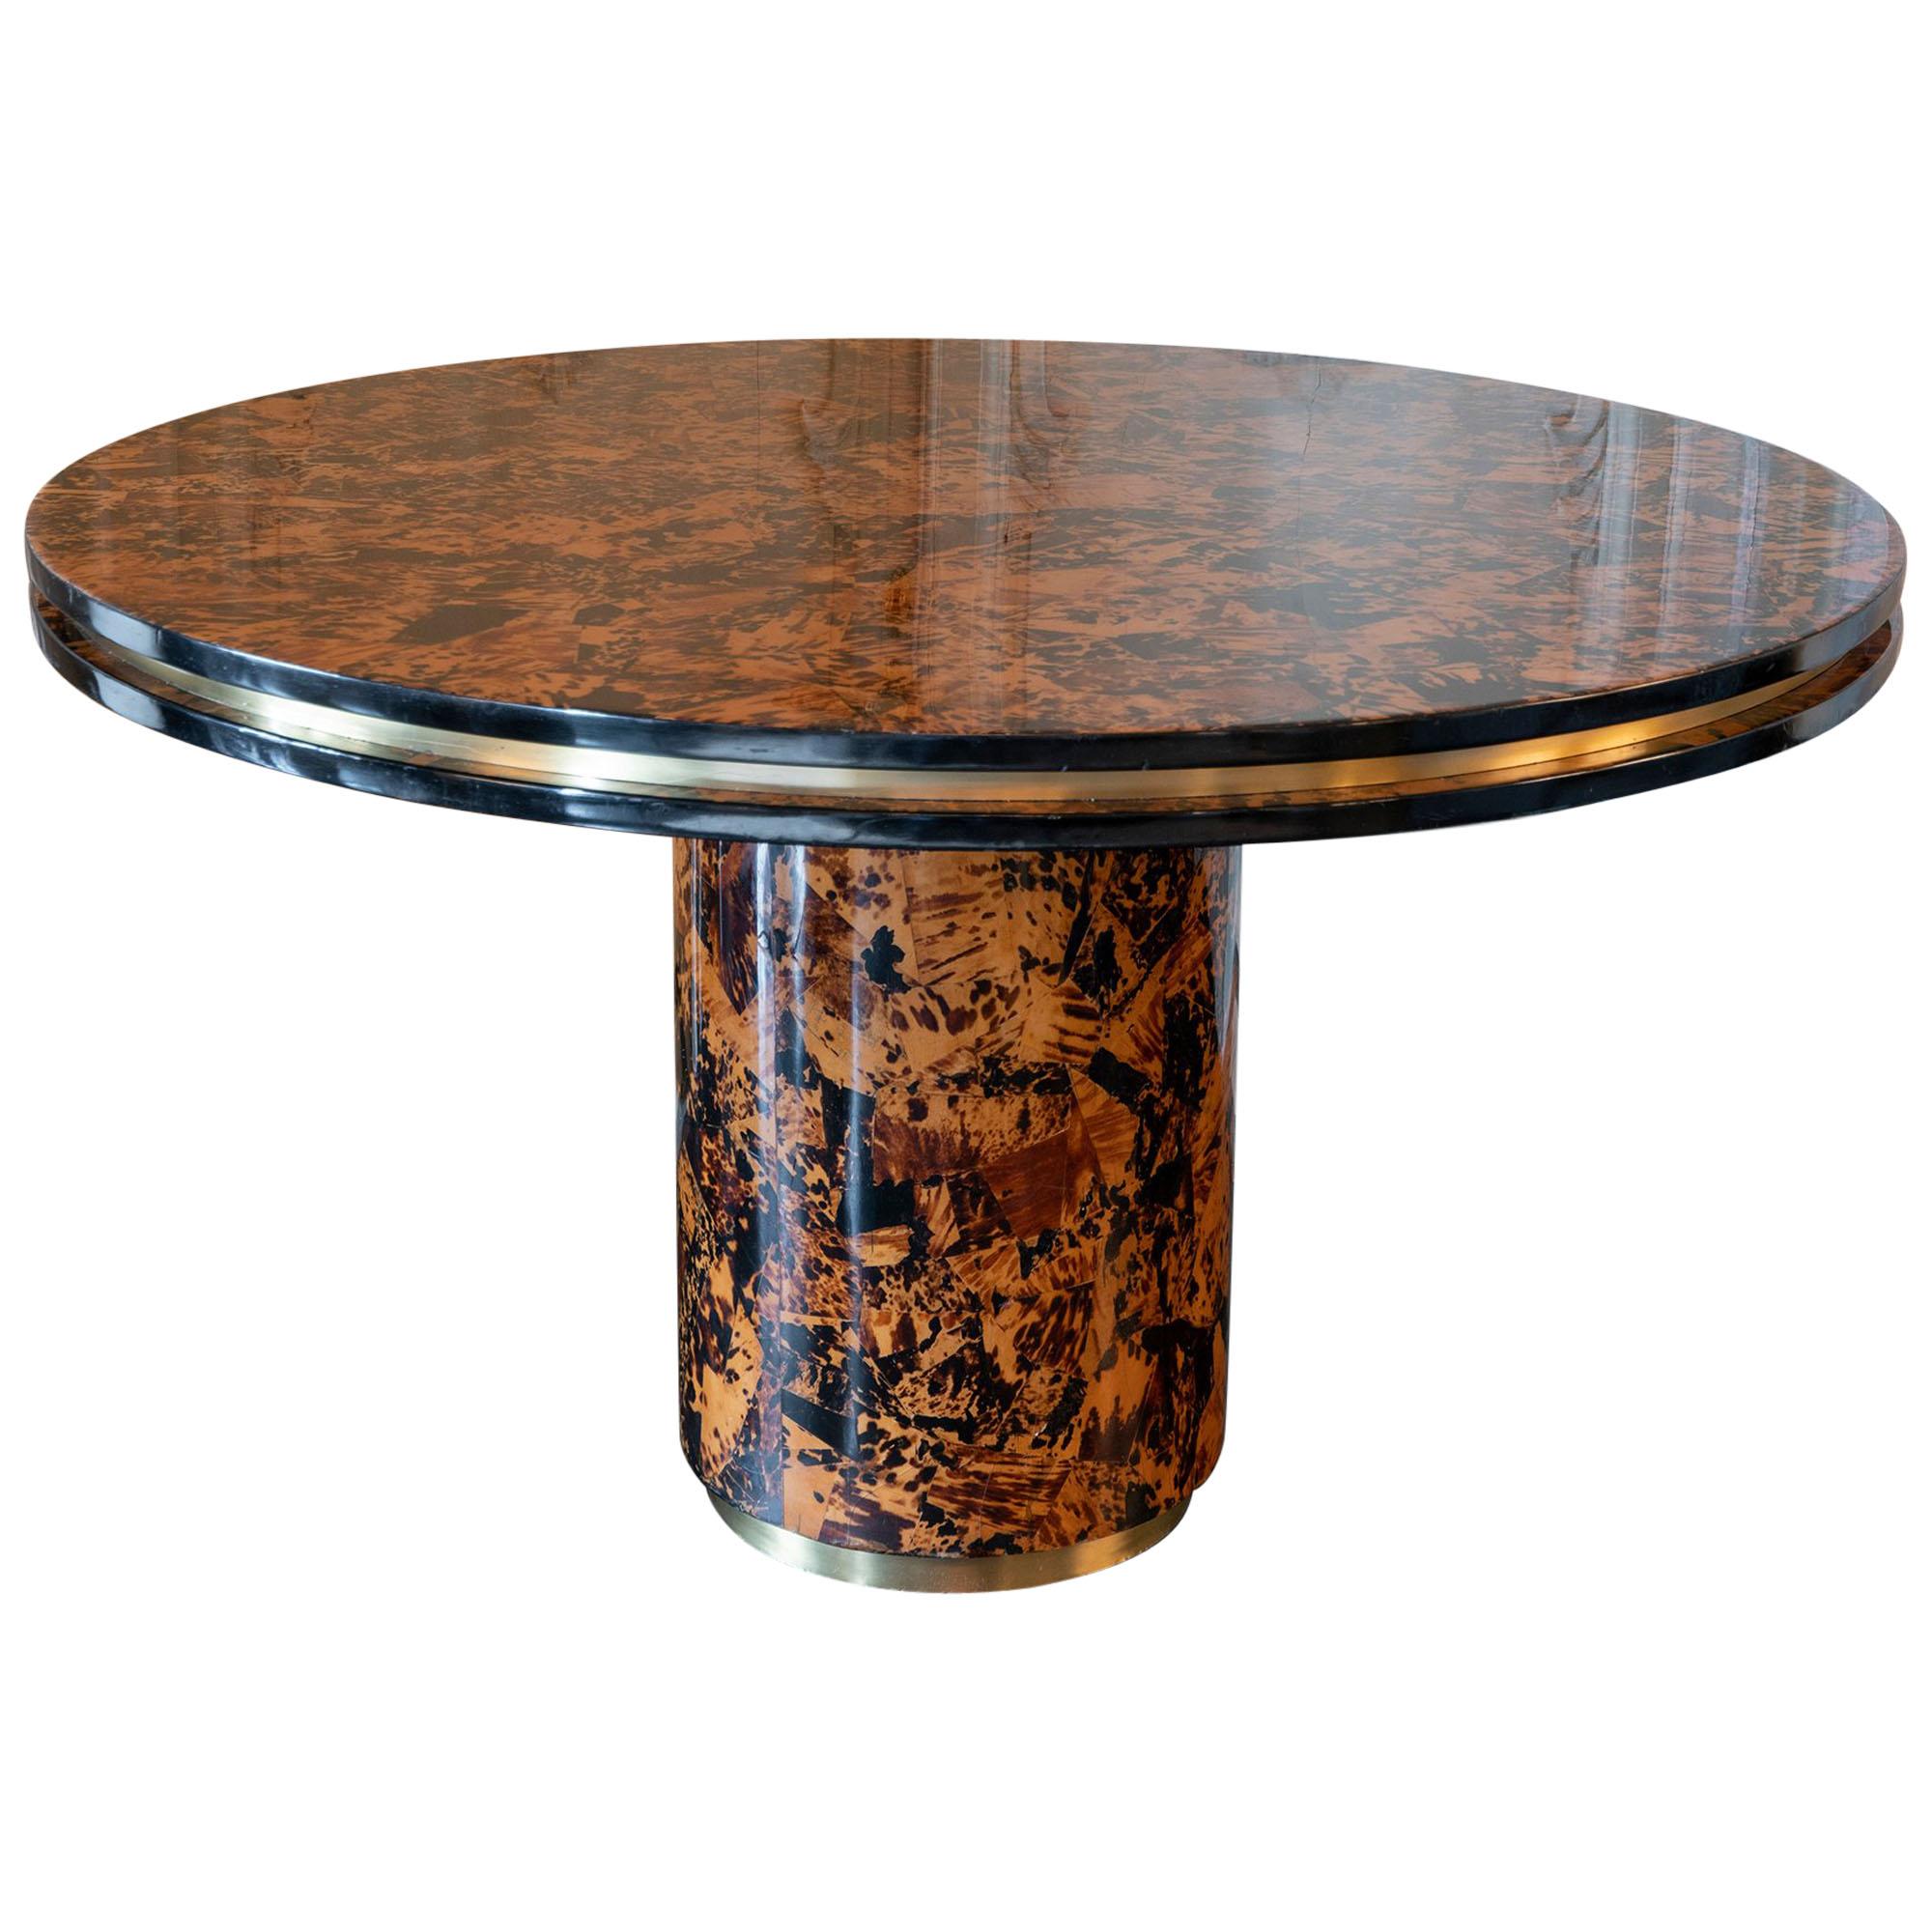 Willy Rizzo Burl Wood Round Center/Dining Table, Brass Details, Italy, 1960s